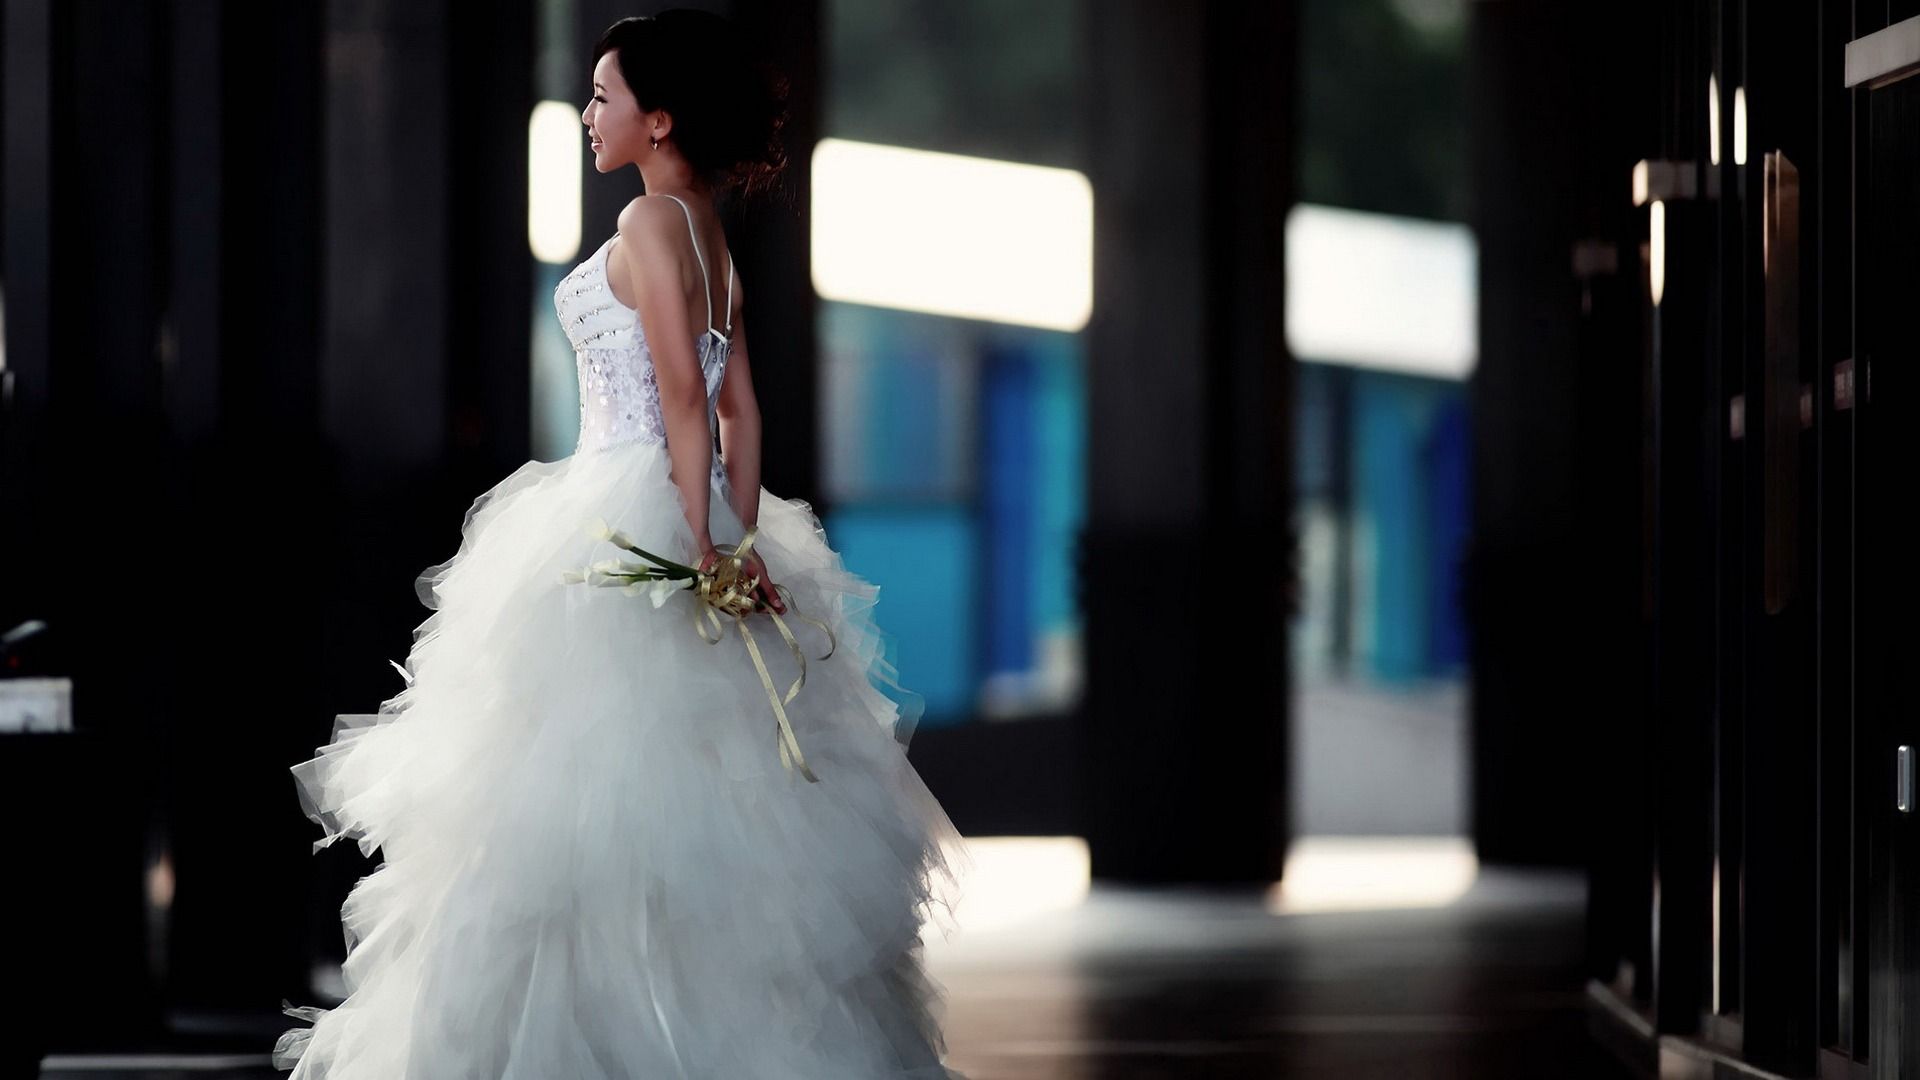 A bride in a white dress holding a bouquet of flowers. - Wedding